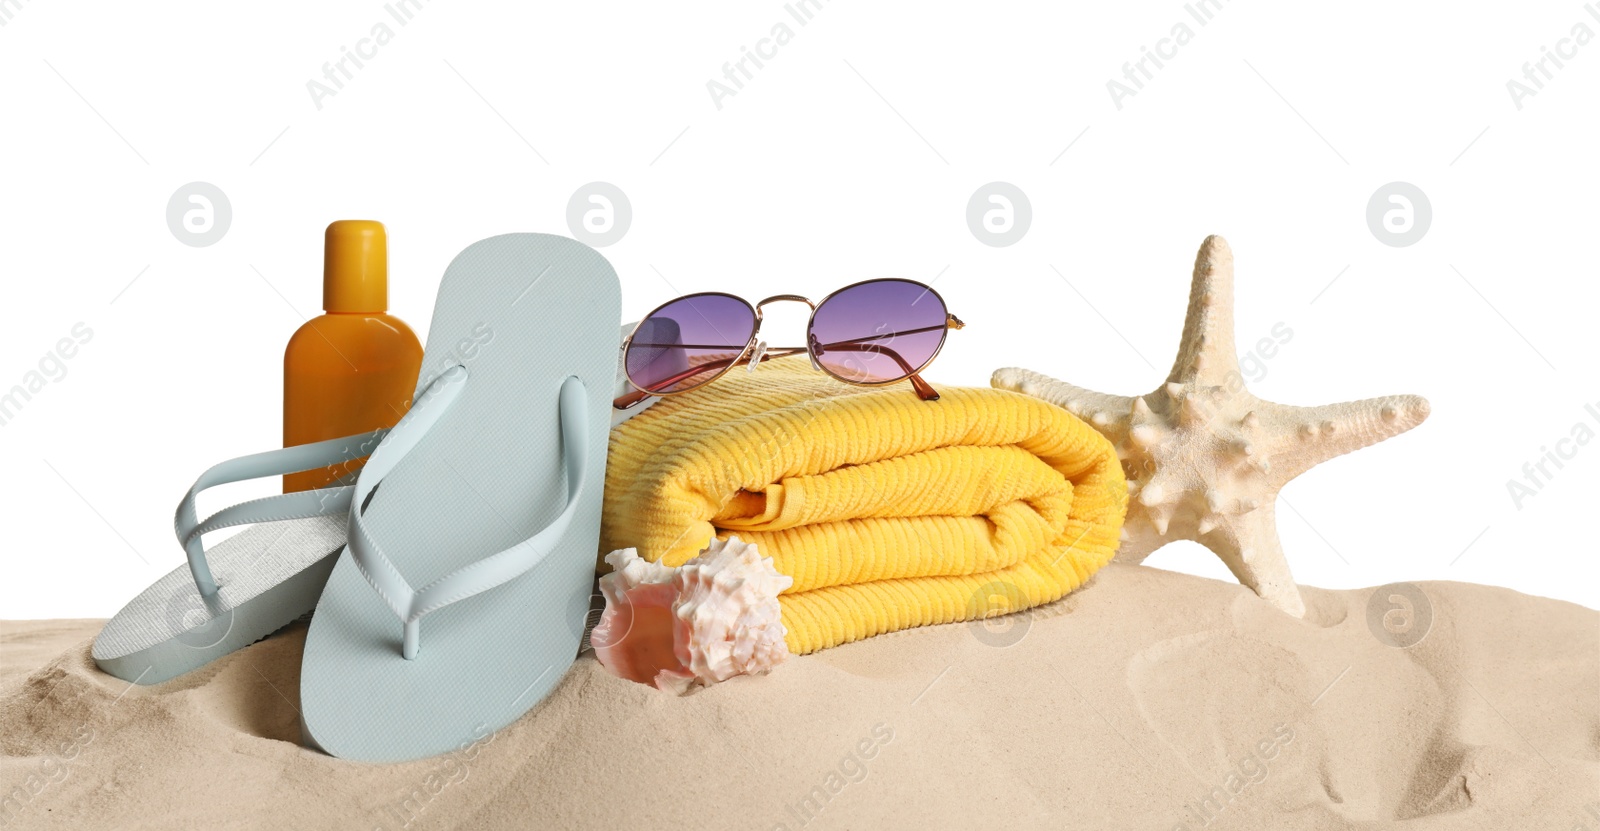 Photo of Different beach objects on sand against white background